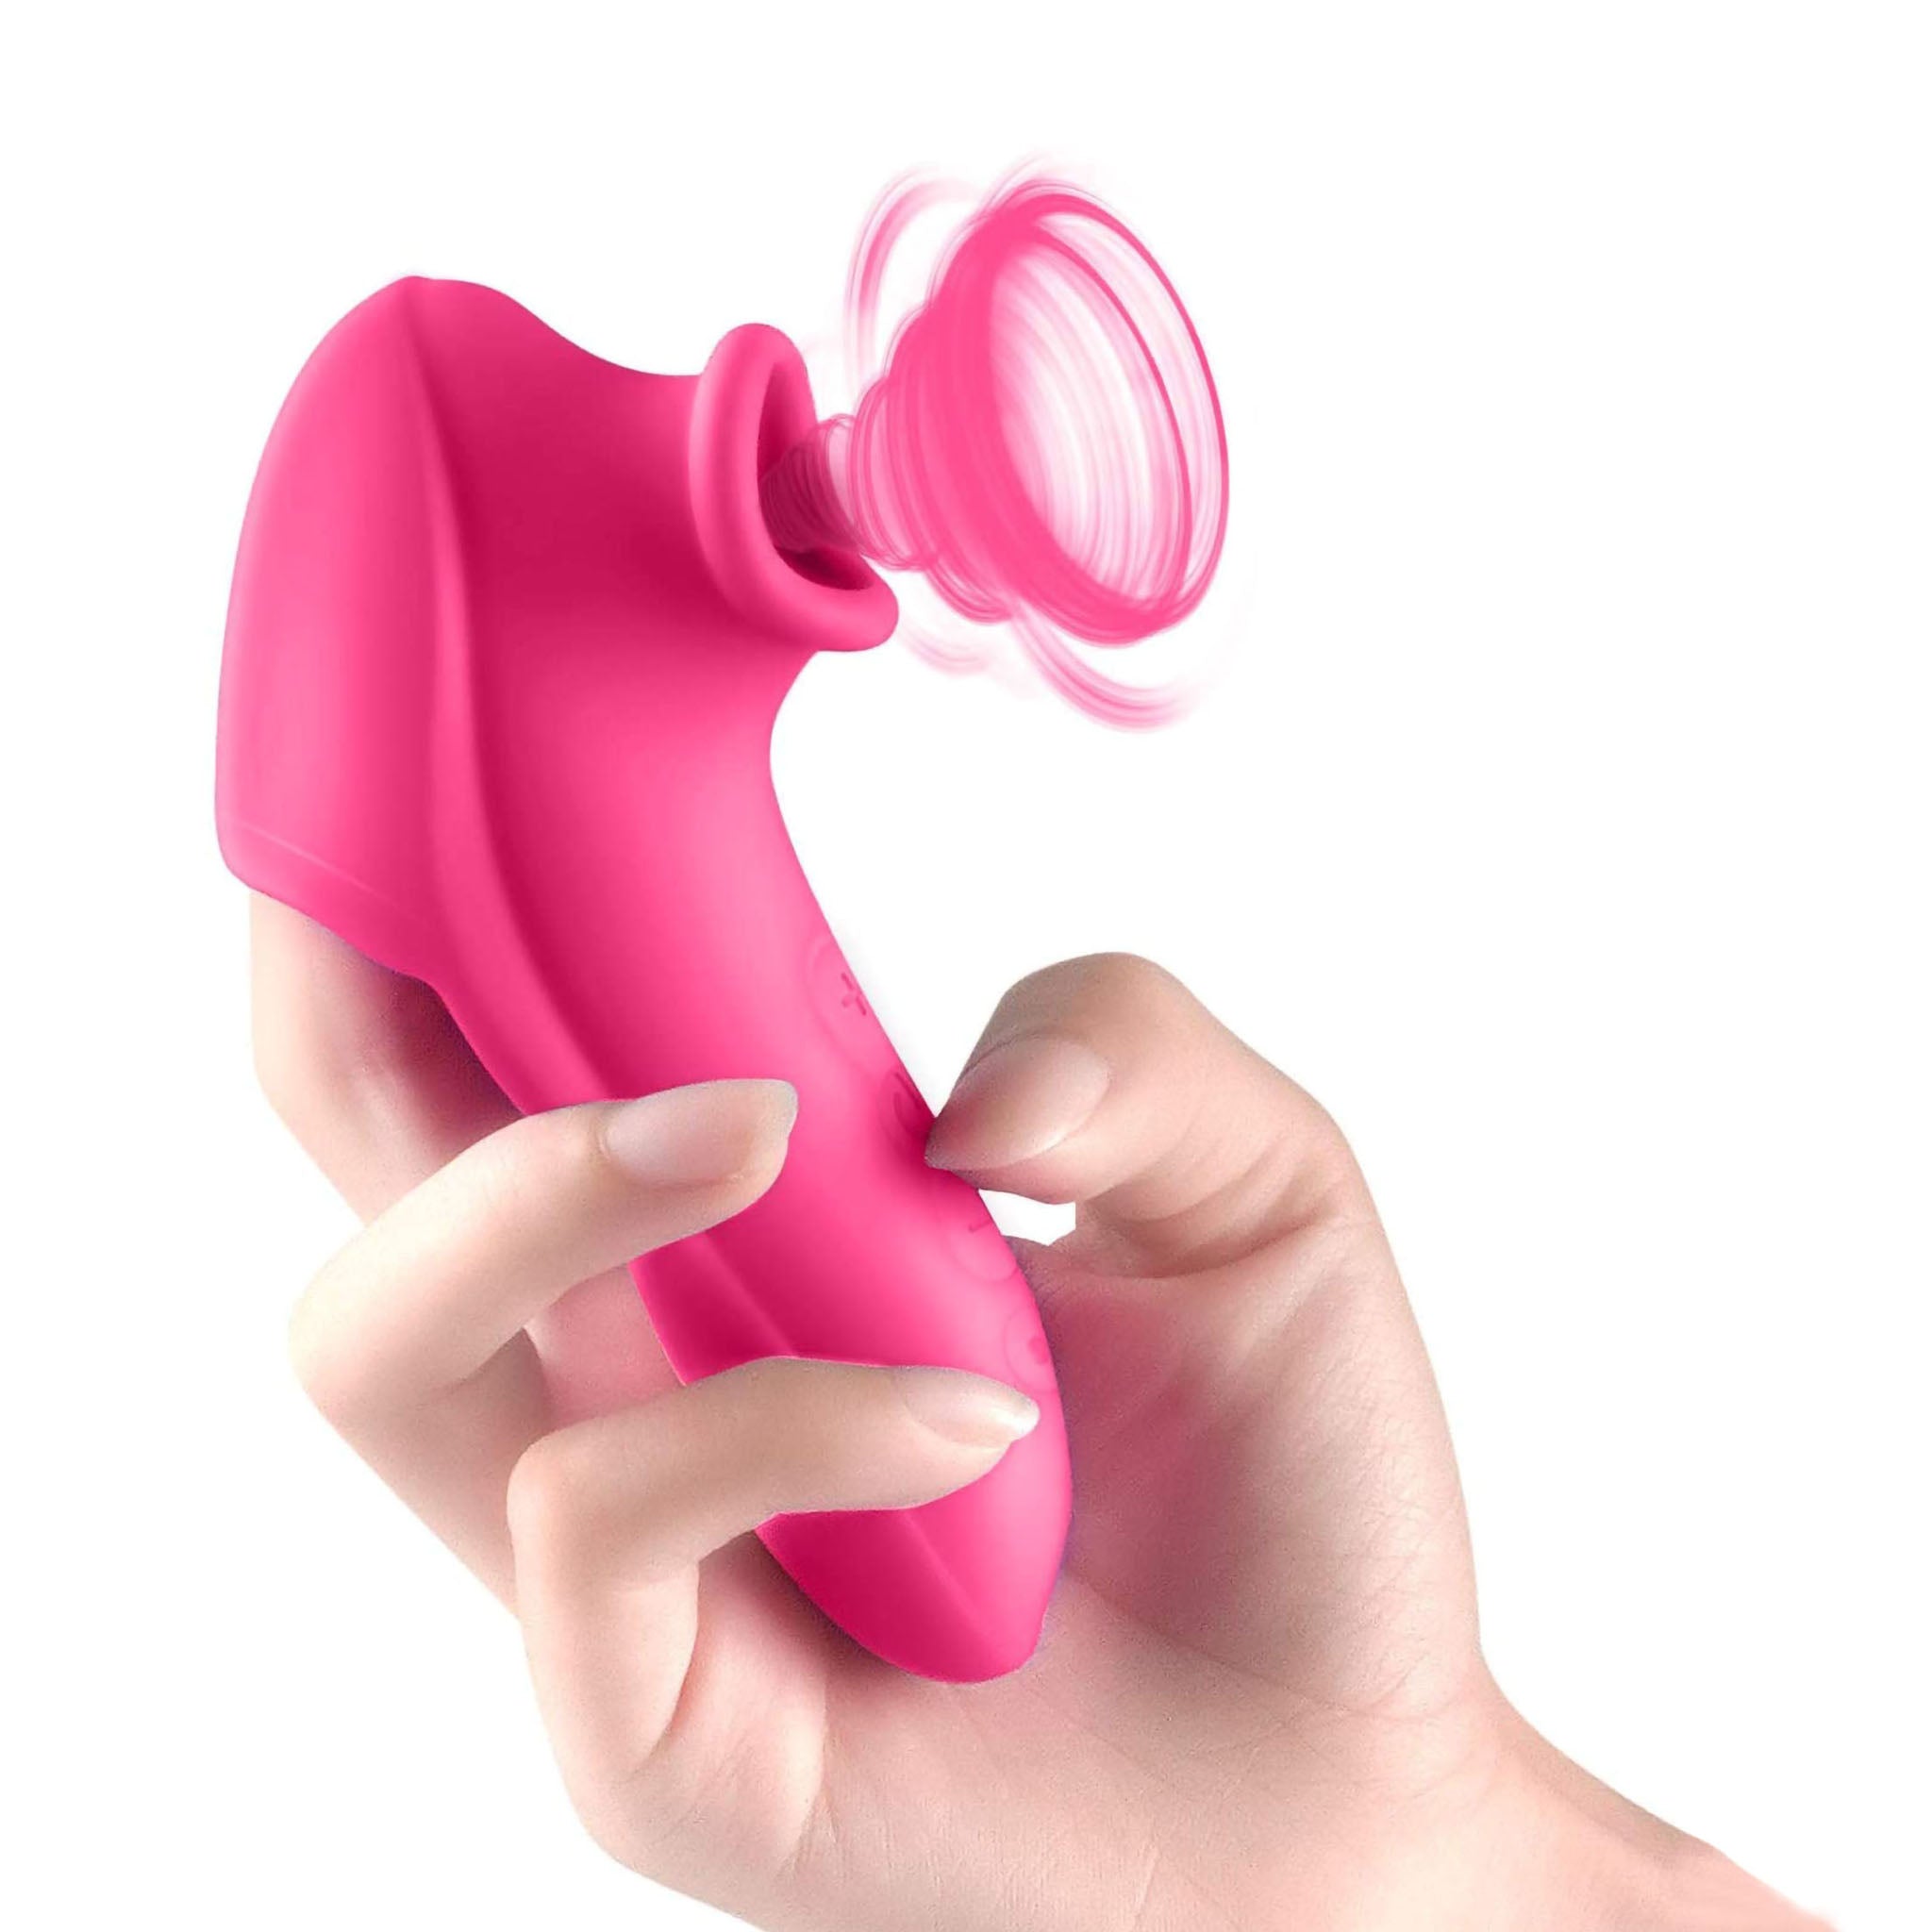 Rechargeable Nipple Clit Sucking Vibrator Stimulator Sex Toys for Women Couples